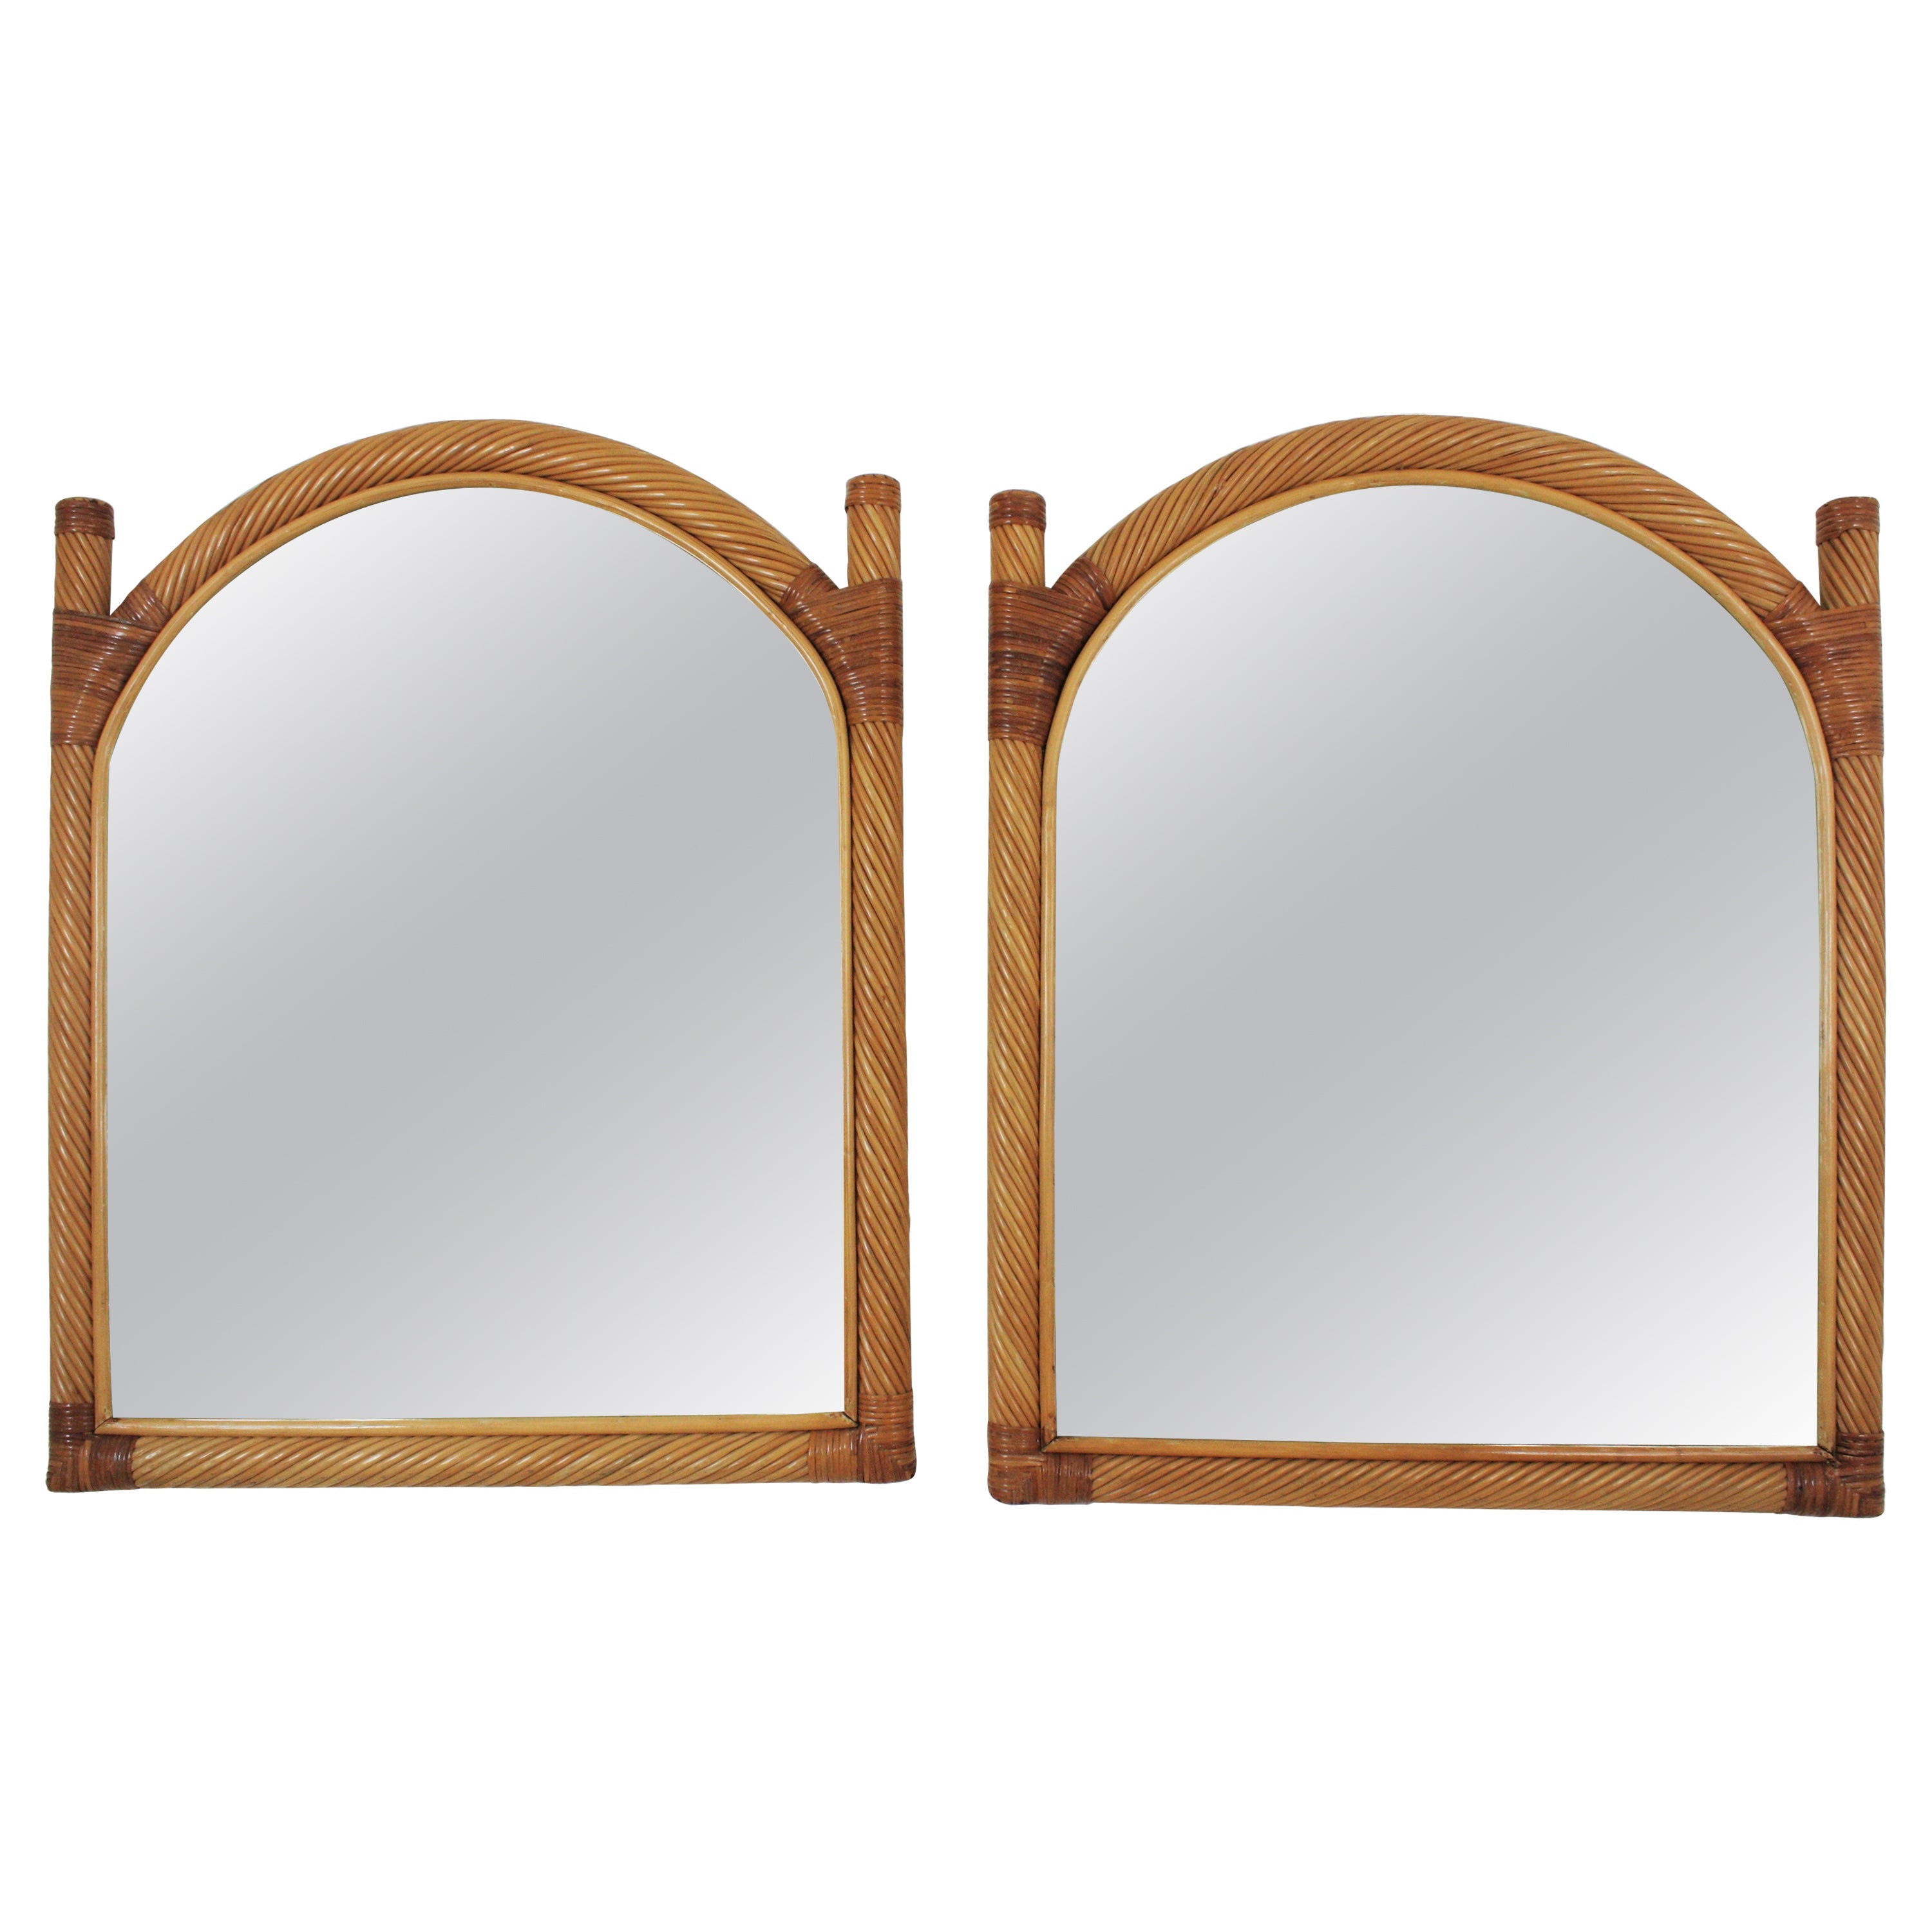 Pair of Vivai del Sud Rattan Pencil Reed Mirrors with Arch Top